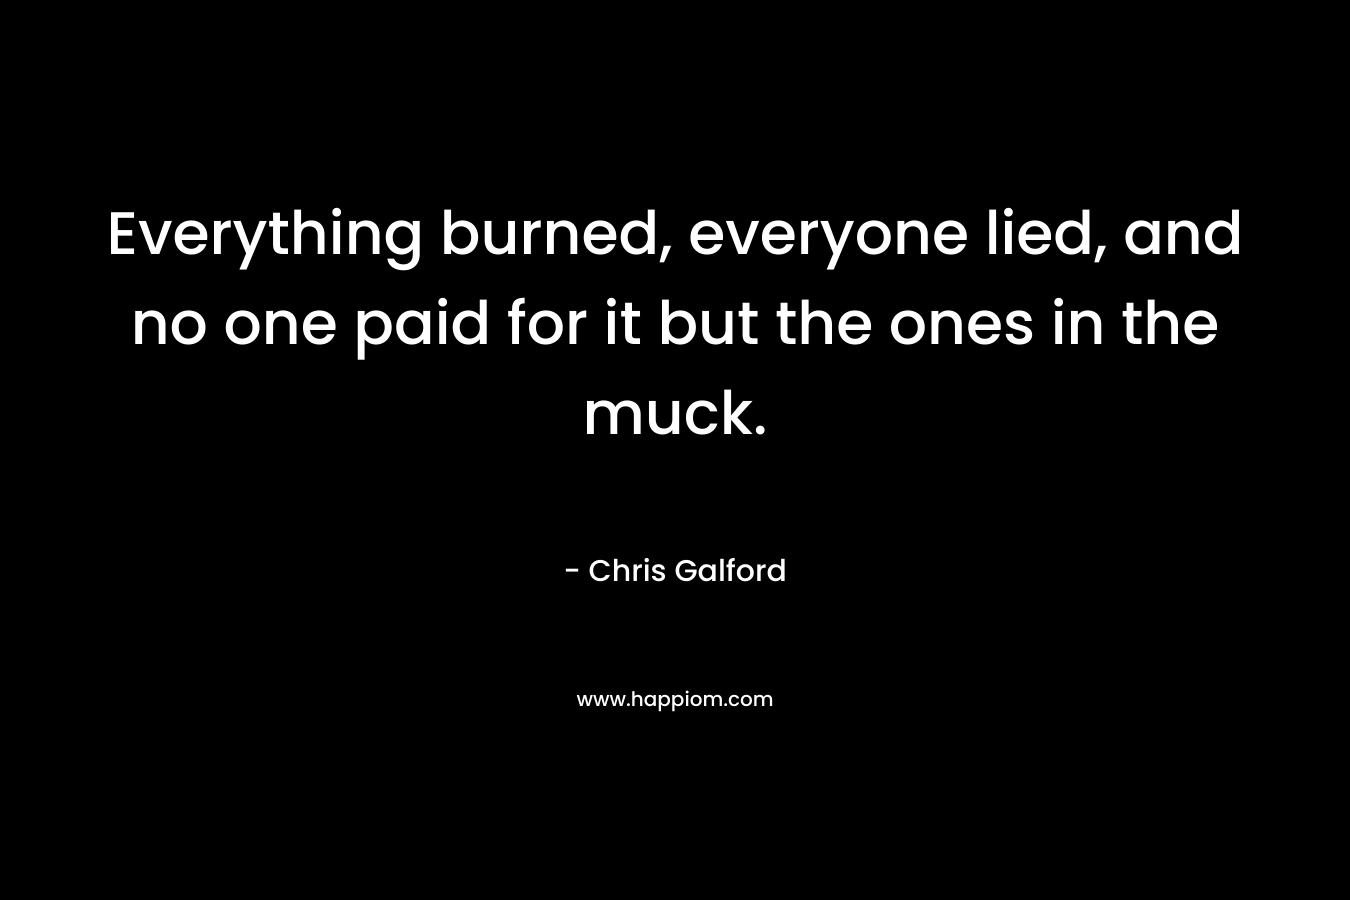 Everything burned, everyone lied, and no one paid for it but the ones in the muck. – Chris Galford